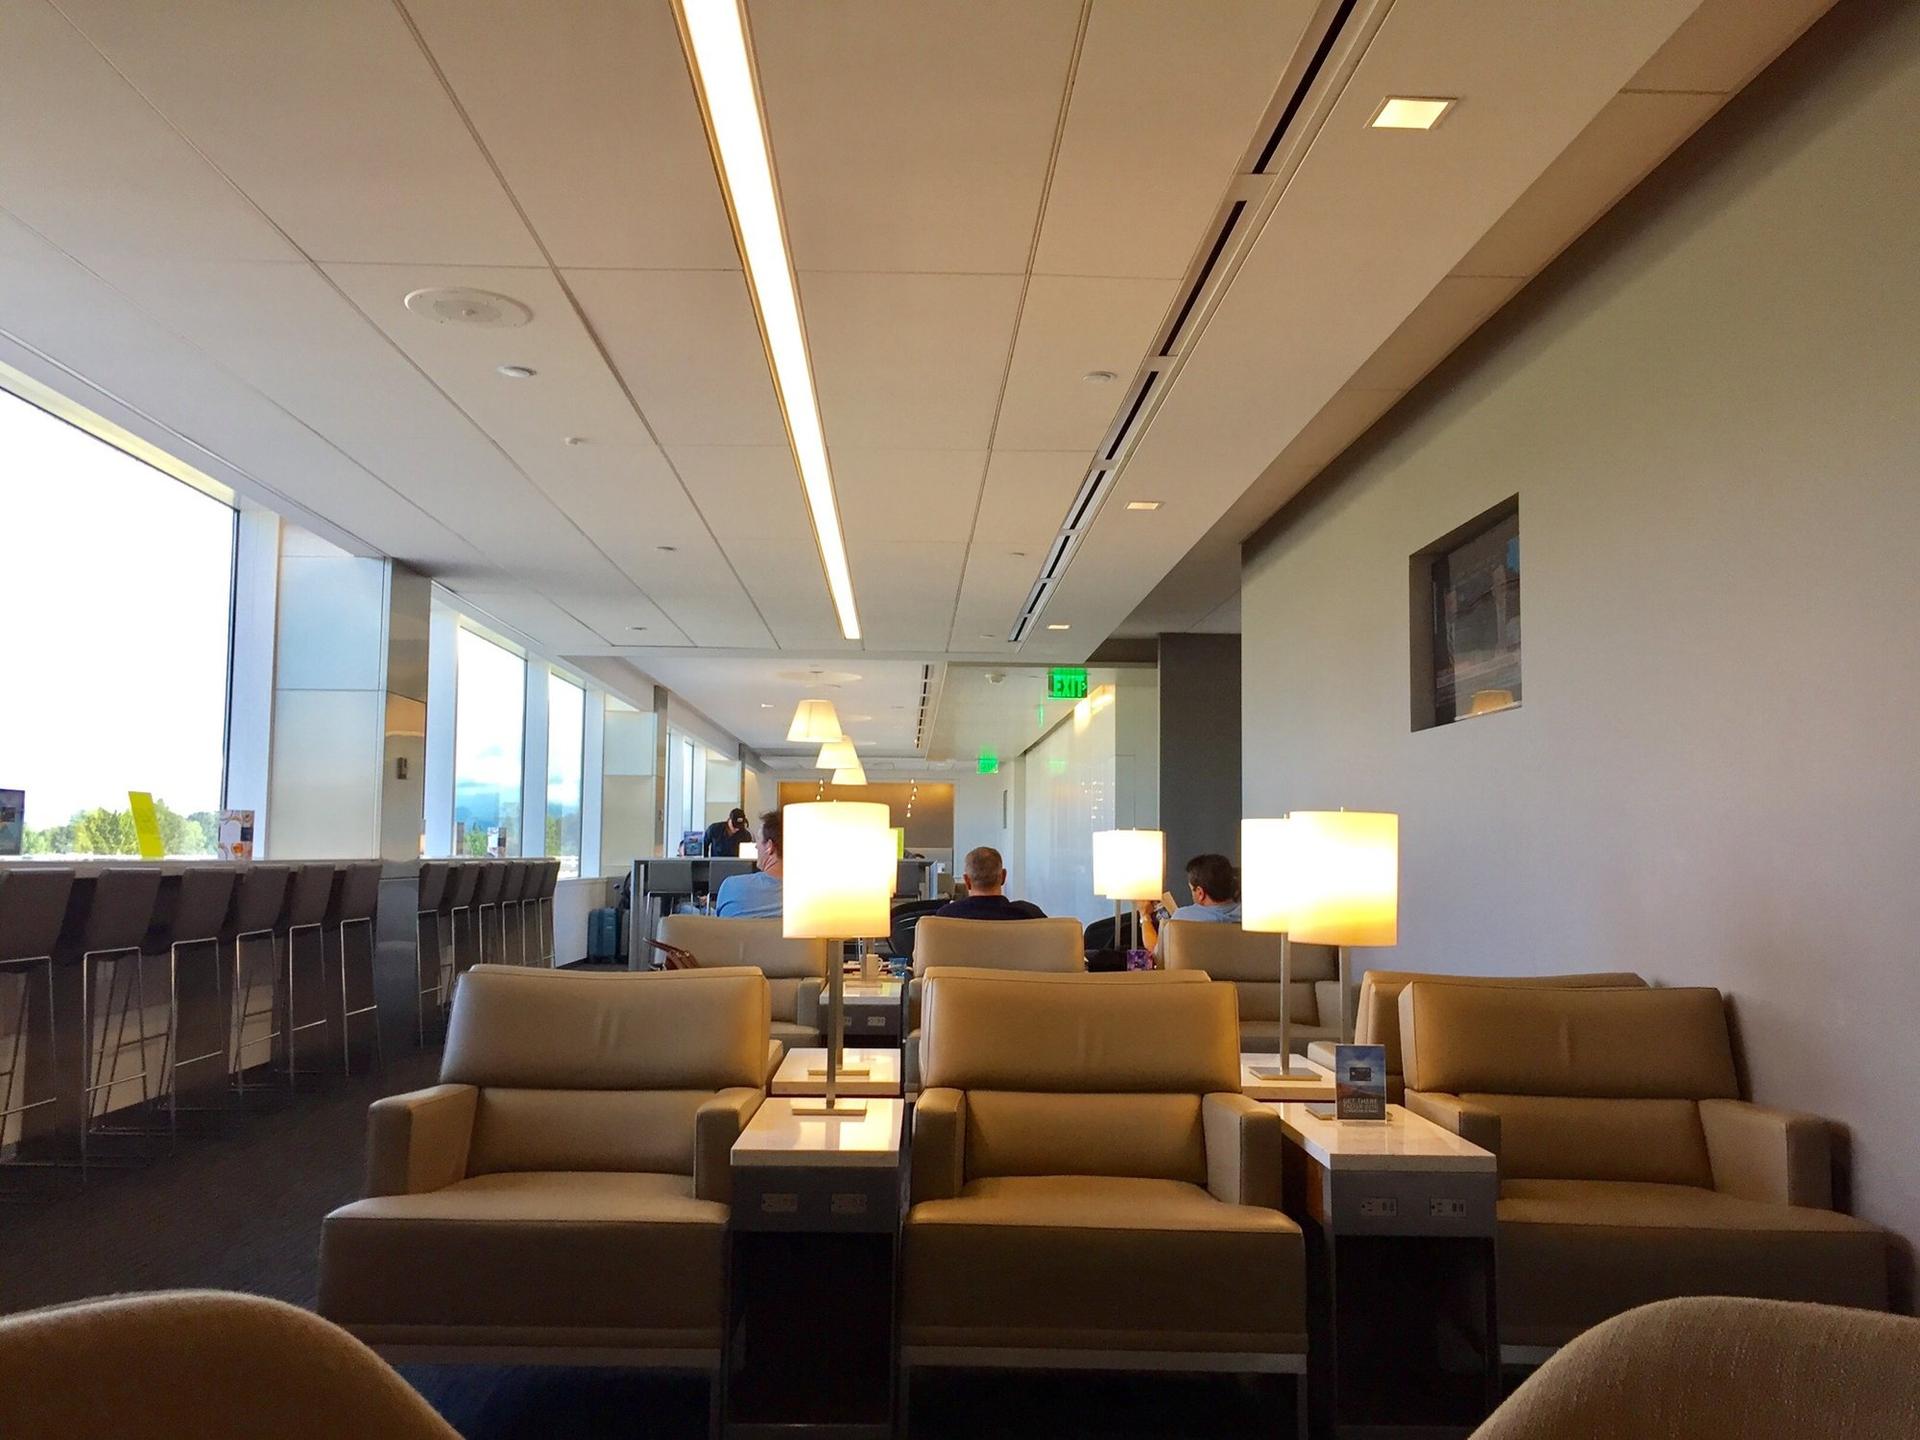 United Airlines United Club image 43 of 57